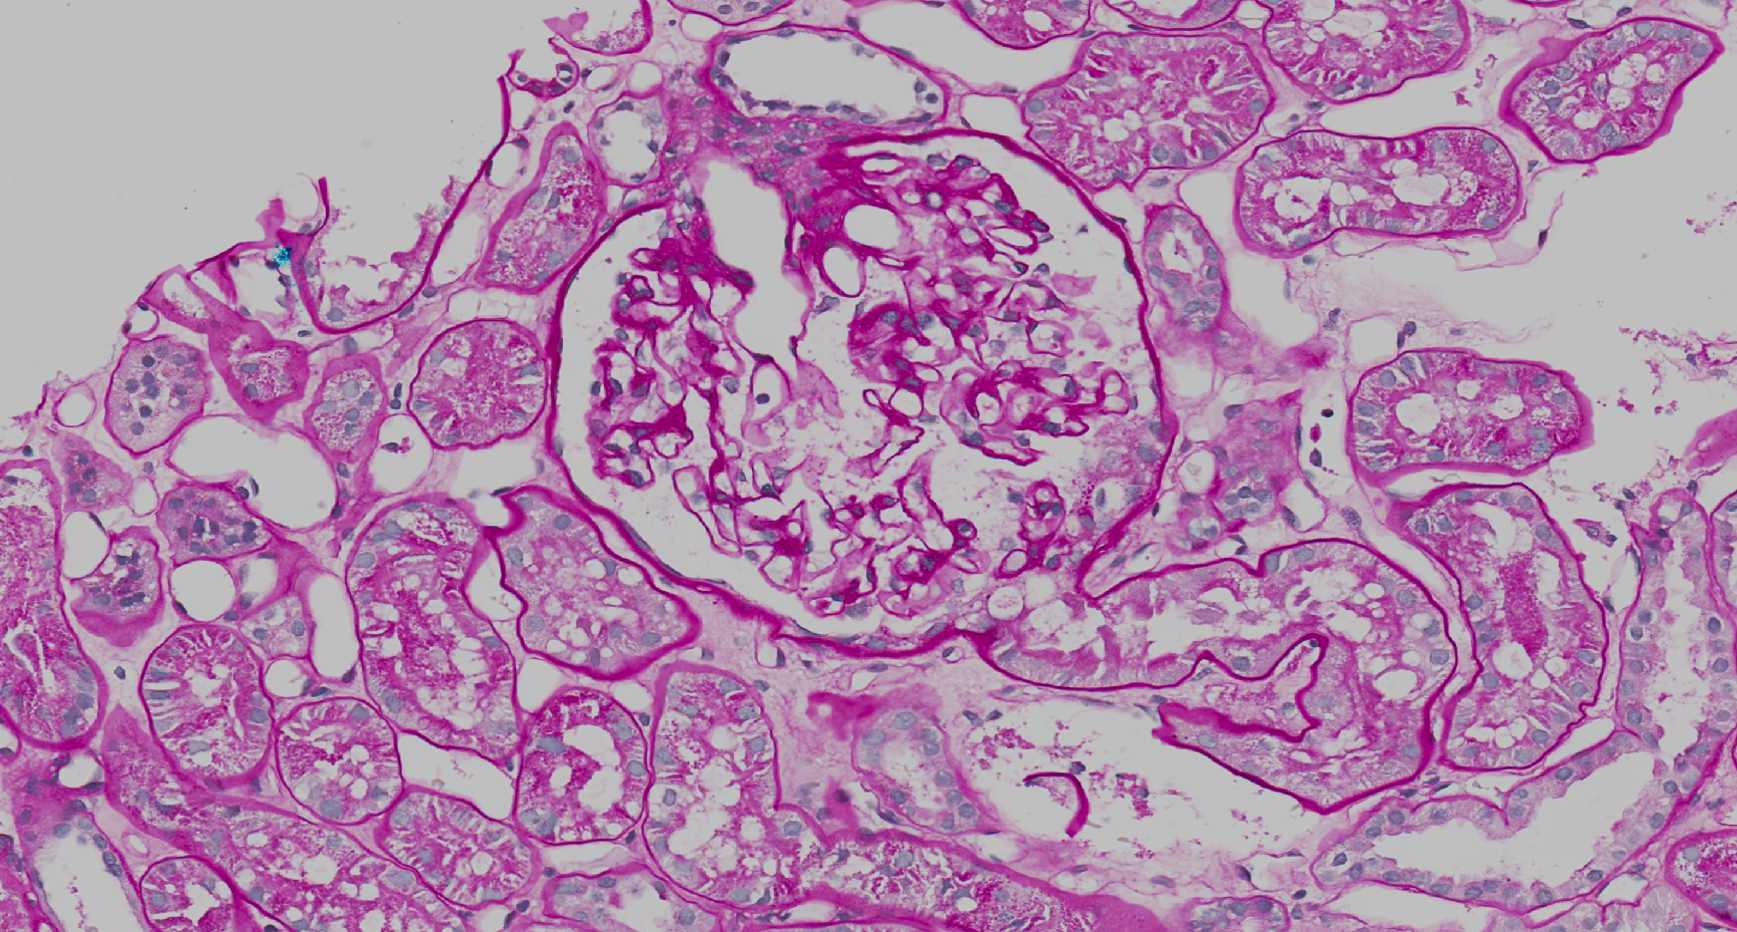 Glomerulus and attached proximal tube (clinical biopsy)